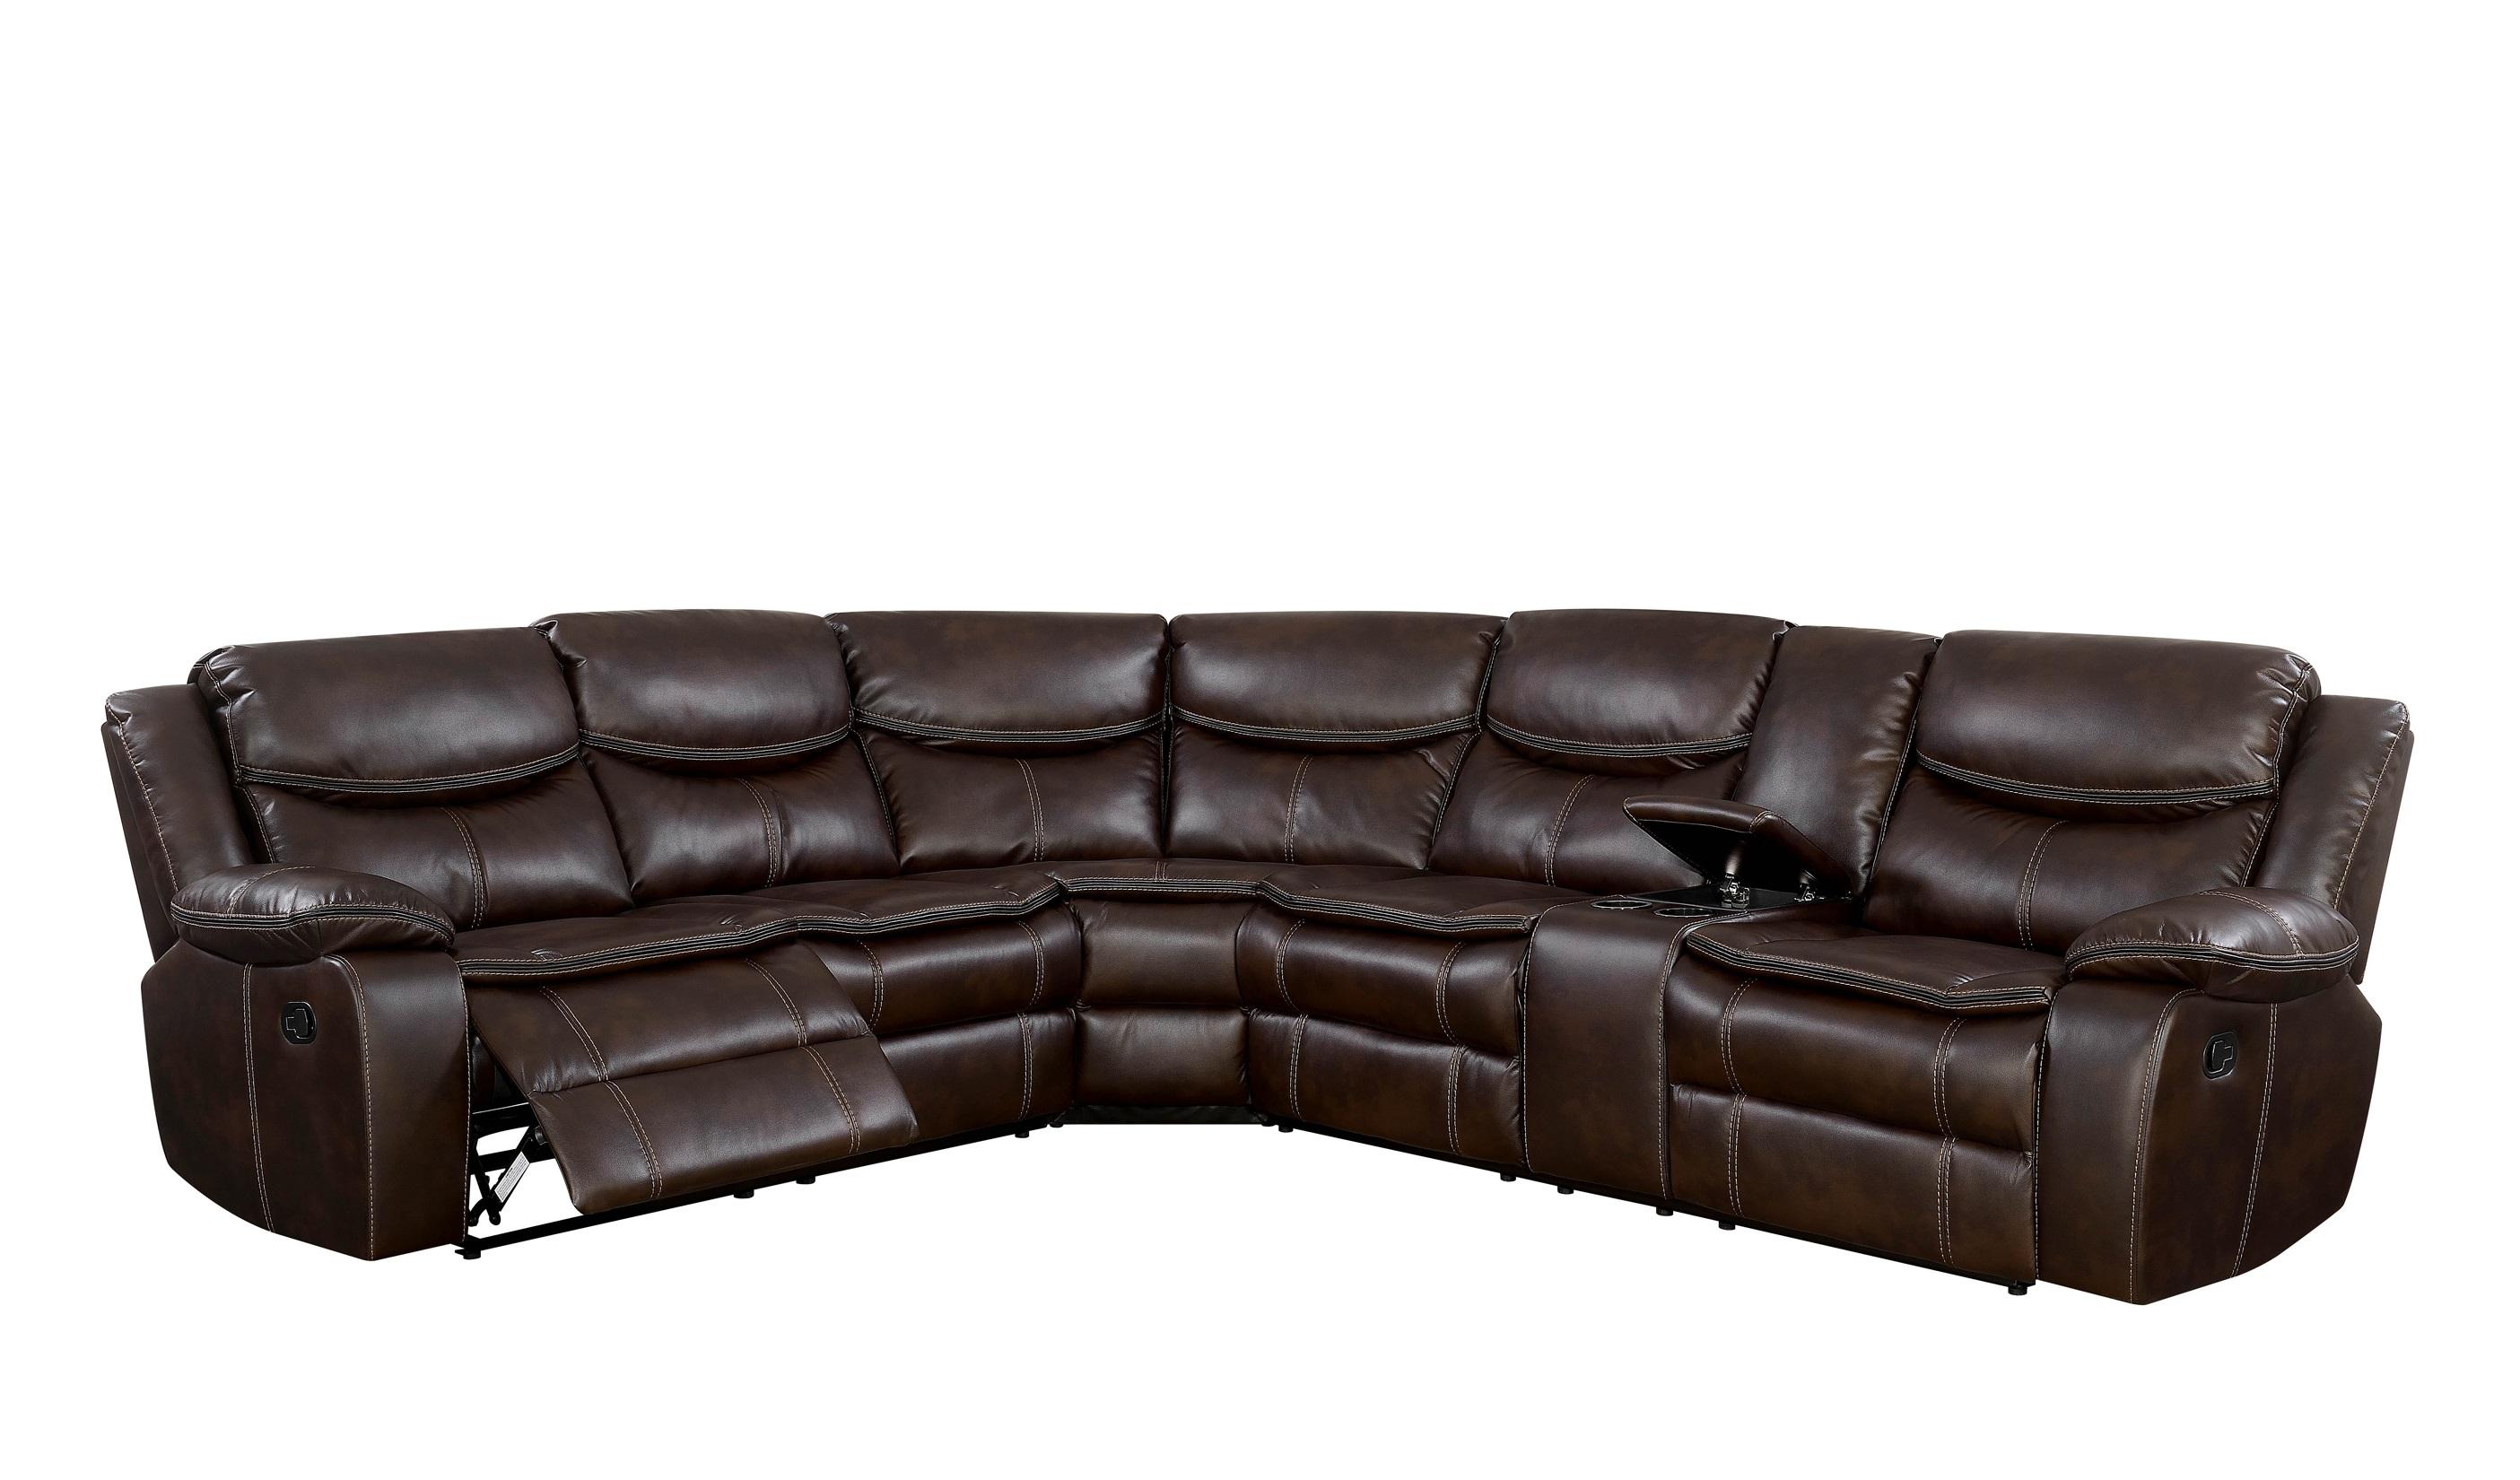 Furniture of America POLLUX CM6982BR Recliner Sectional